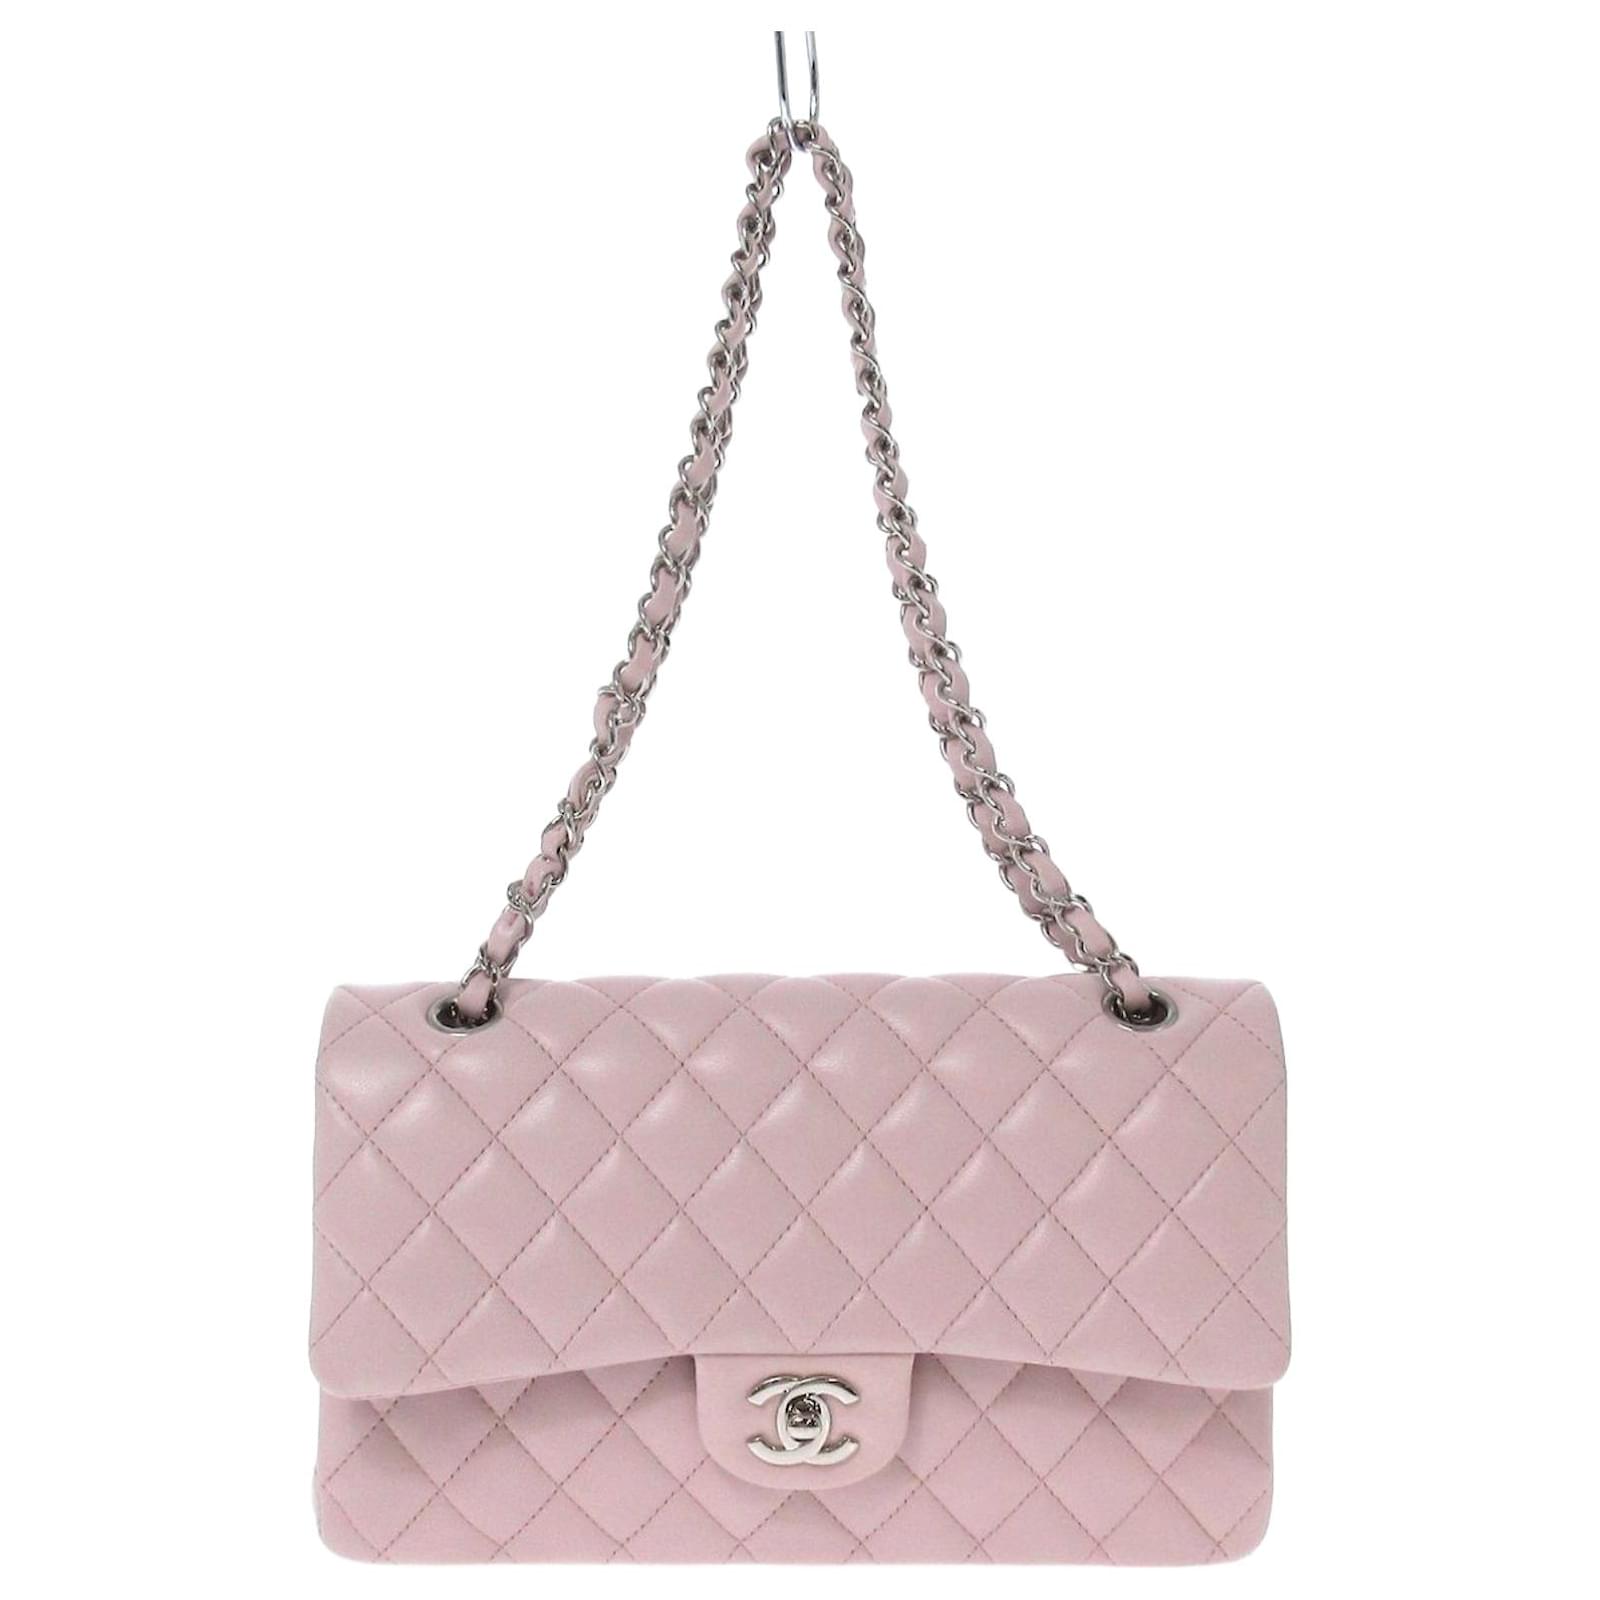 2.55 Chanel Classic Double Flap Shoulder Bag in Pink Leather ref